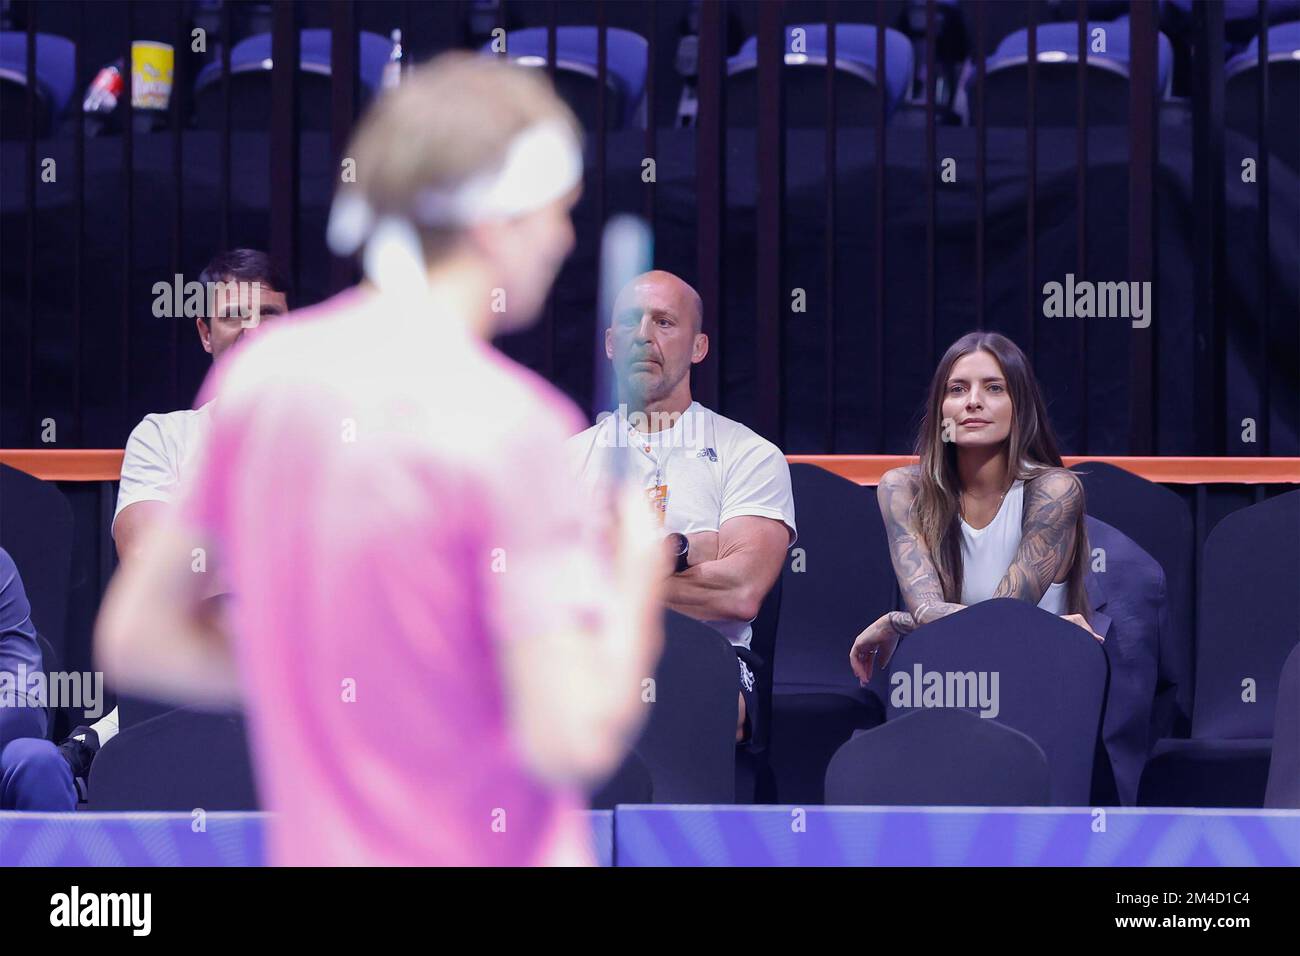 Dubai,UAE, 20th,December 2022. German tennis player Alexander Dubai,UAE, 20th,December 2022. German tennis player Alexander Zverev (out of focus in foreground) girlfriend Sophia Thomalla at the World Tennis League event Dubai on Tuesday 20 December 2022 © Juergen Hasenkopf / Alamy Live News Stock Photo